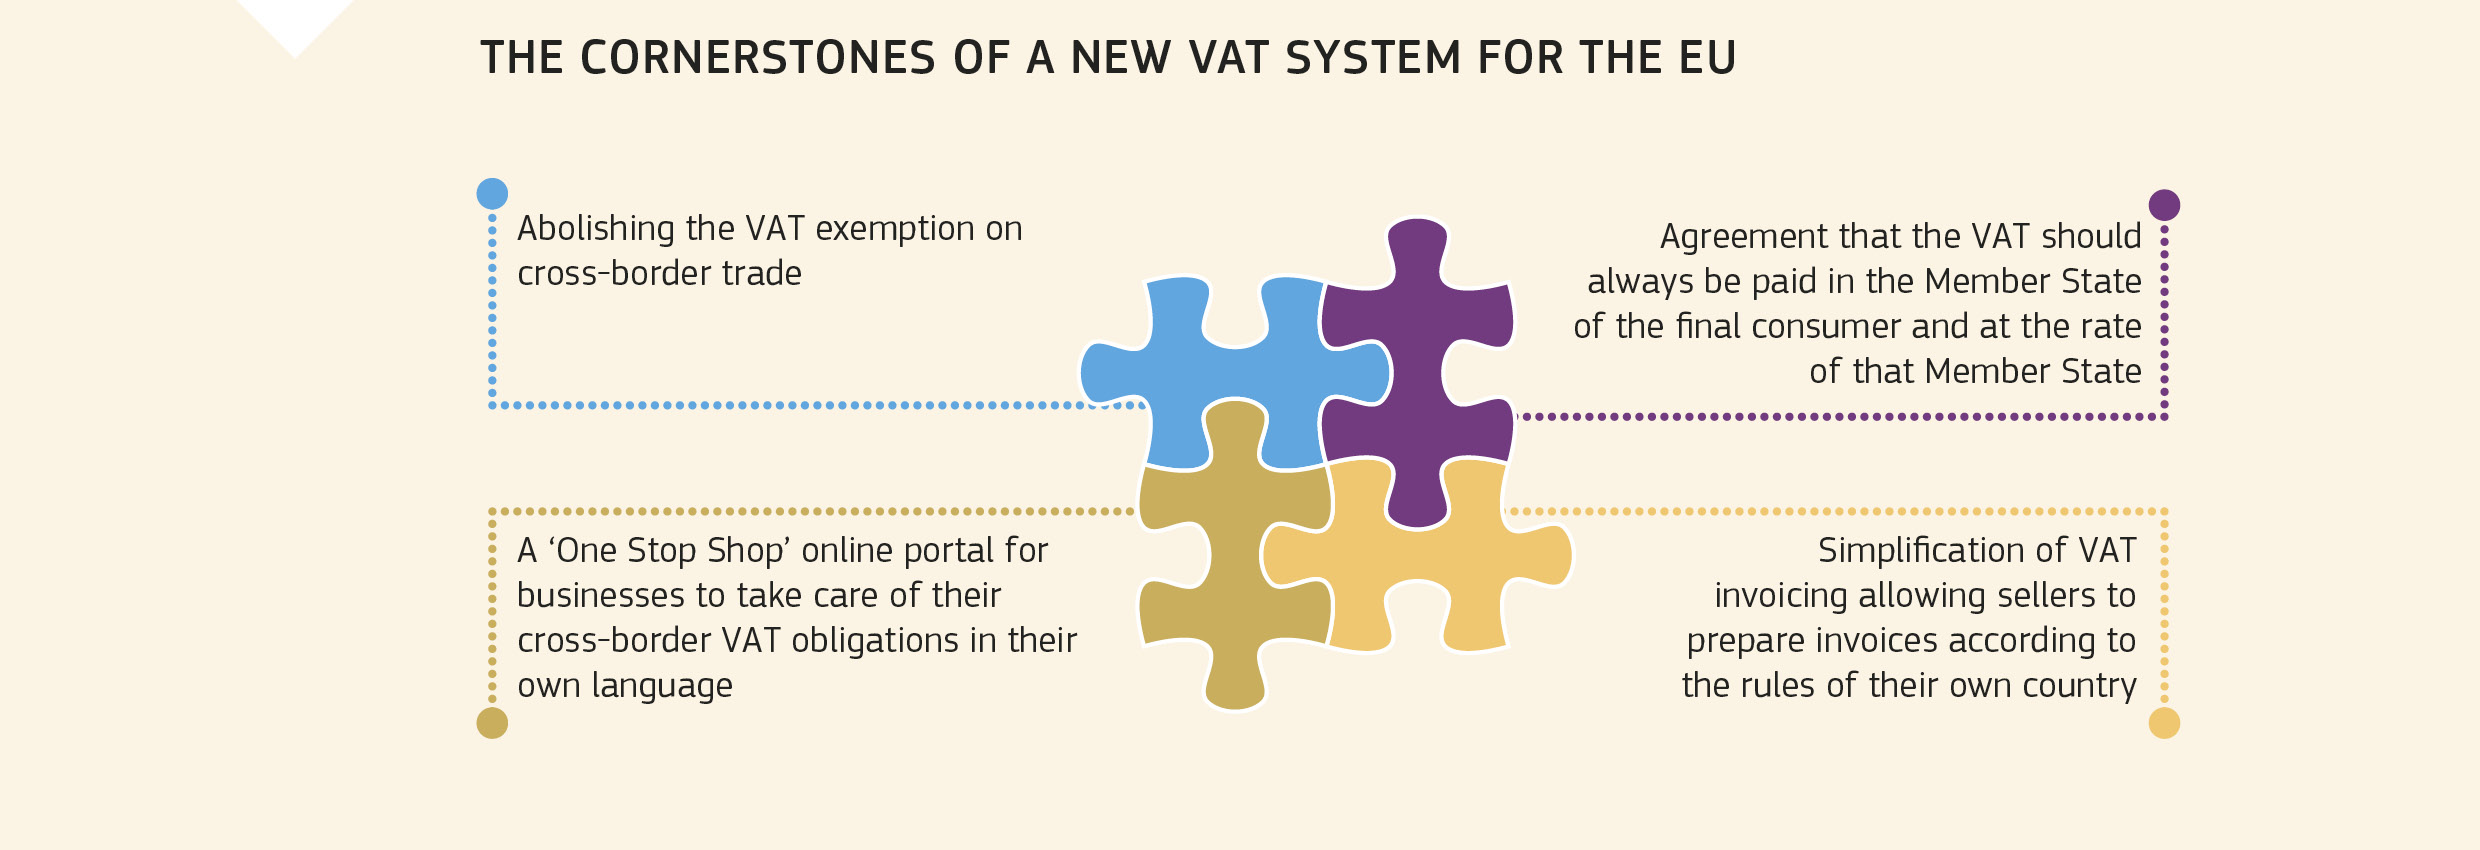 THE CORNERSTONES OF A NEW VAT SYSTEM FOR THE EU